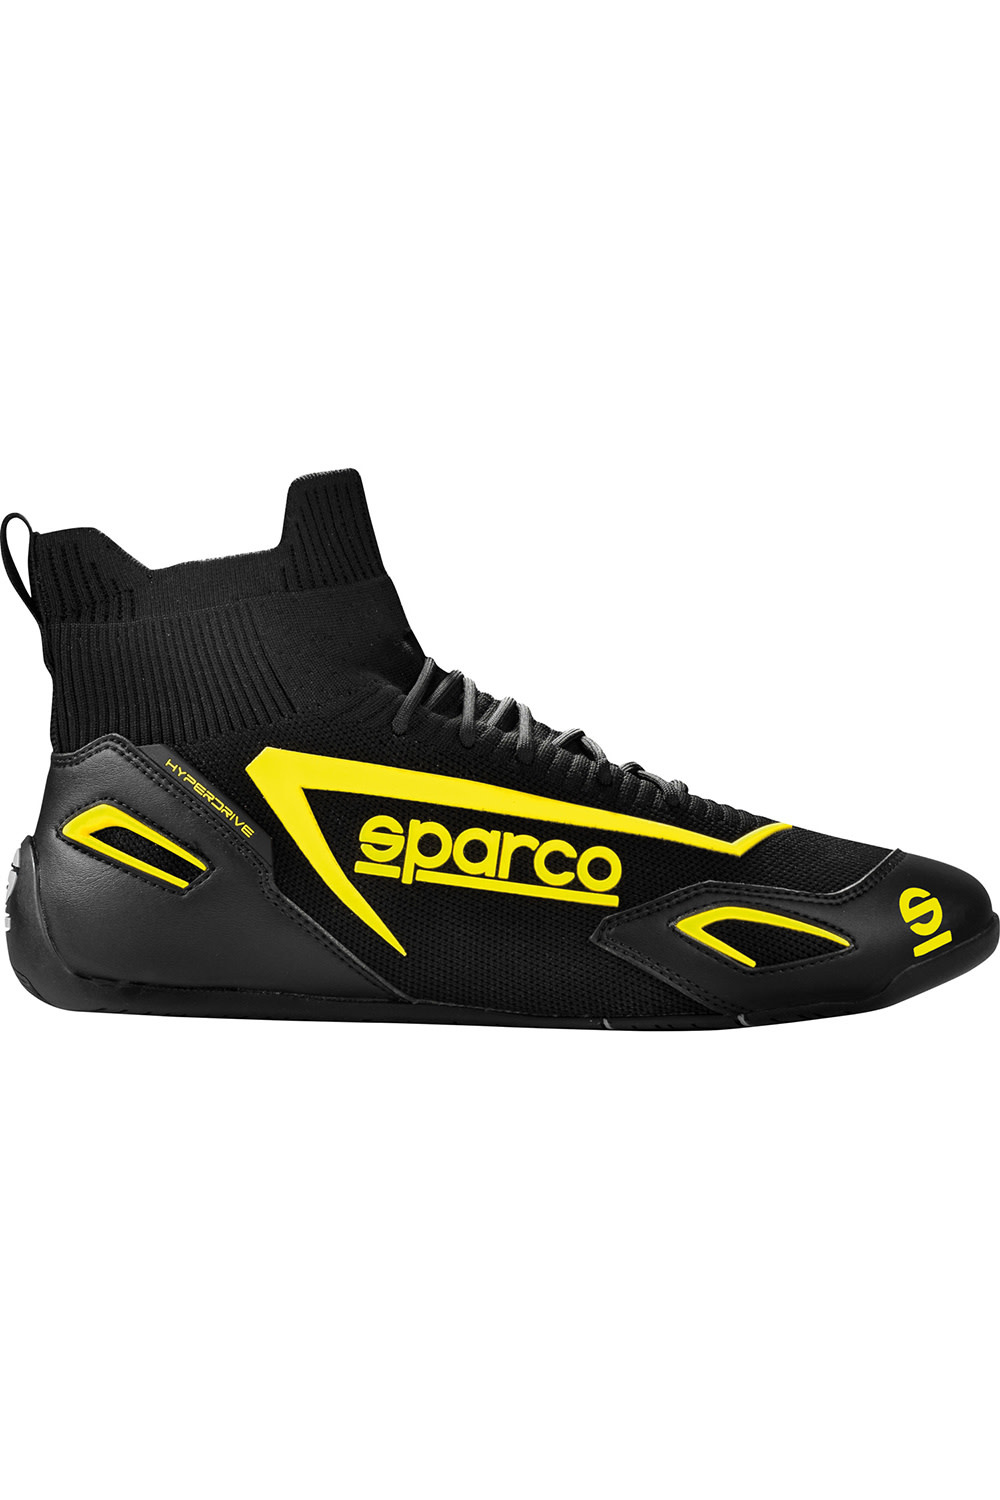 Sparco Hyperdrive SimRacing Shoes Black-Yellow